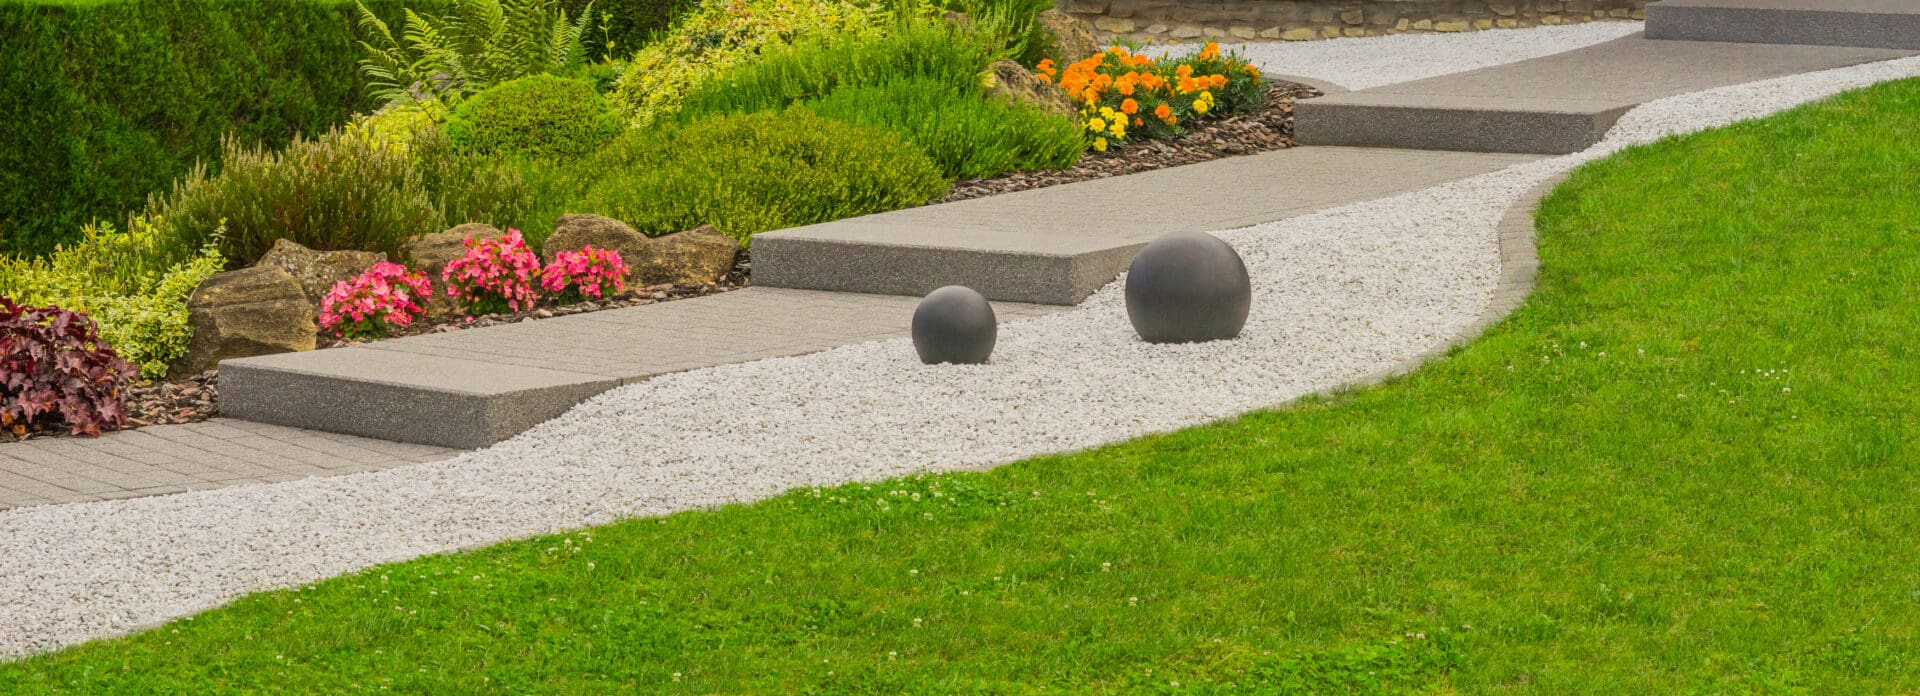 Two balls are on the ground in a garden.